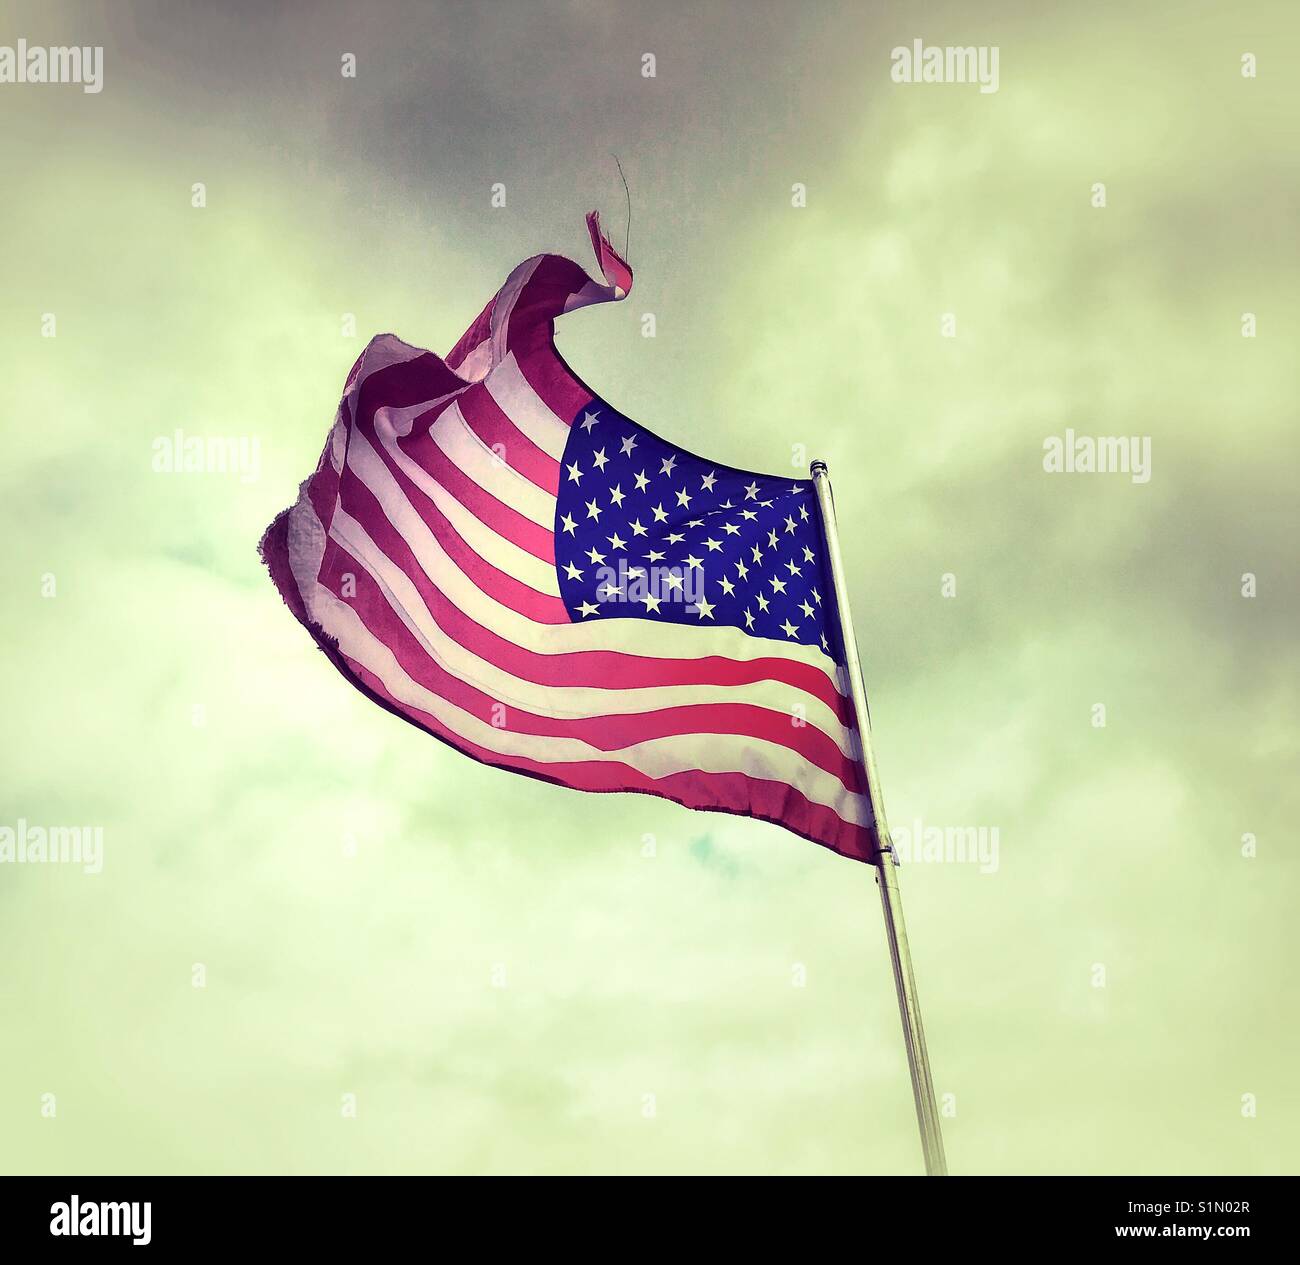 The Star Spangled Banner flag of the USA Stock Photo